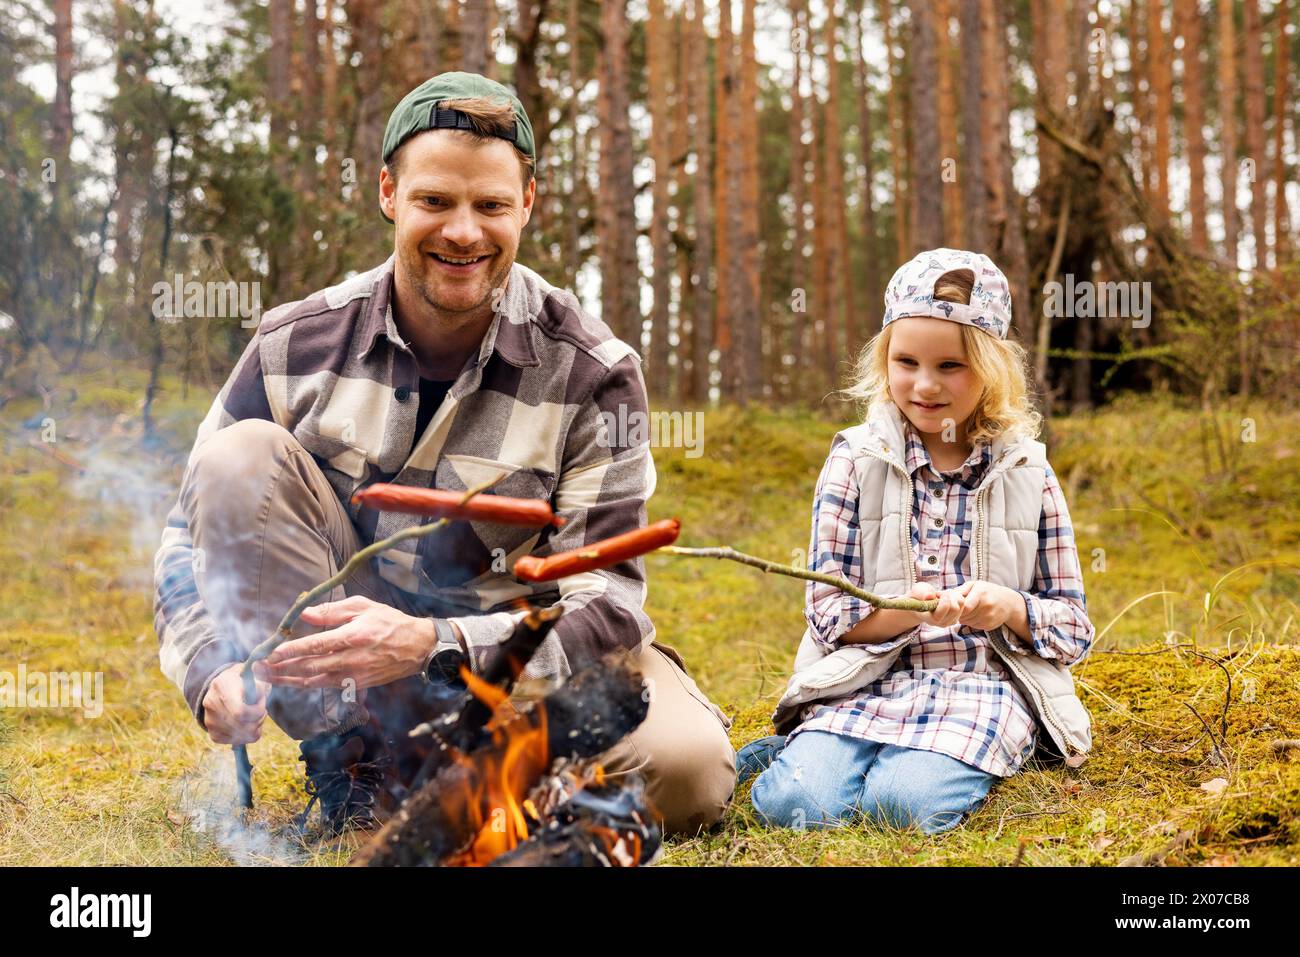 father and daughter spend time together and frying sausages over a bonfire while camping in forest. bonding activities Stock Photo